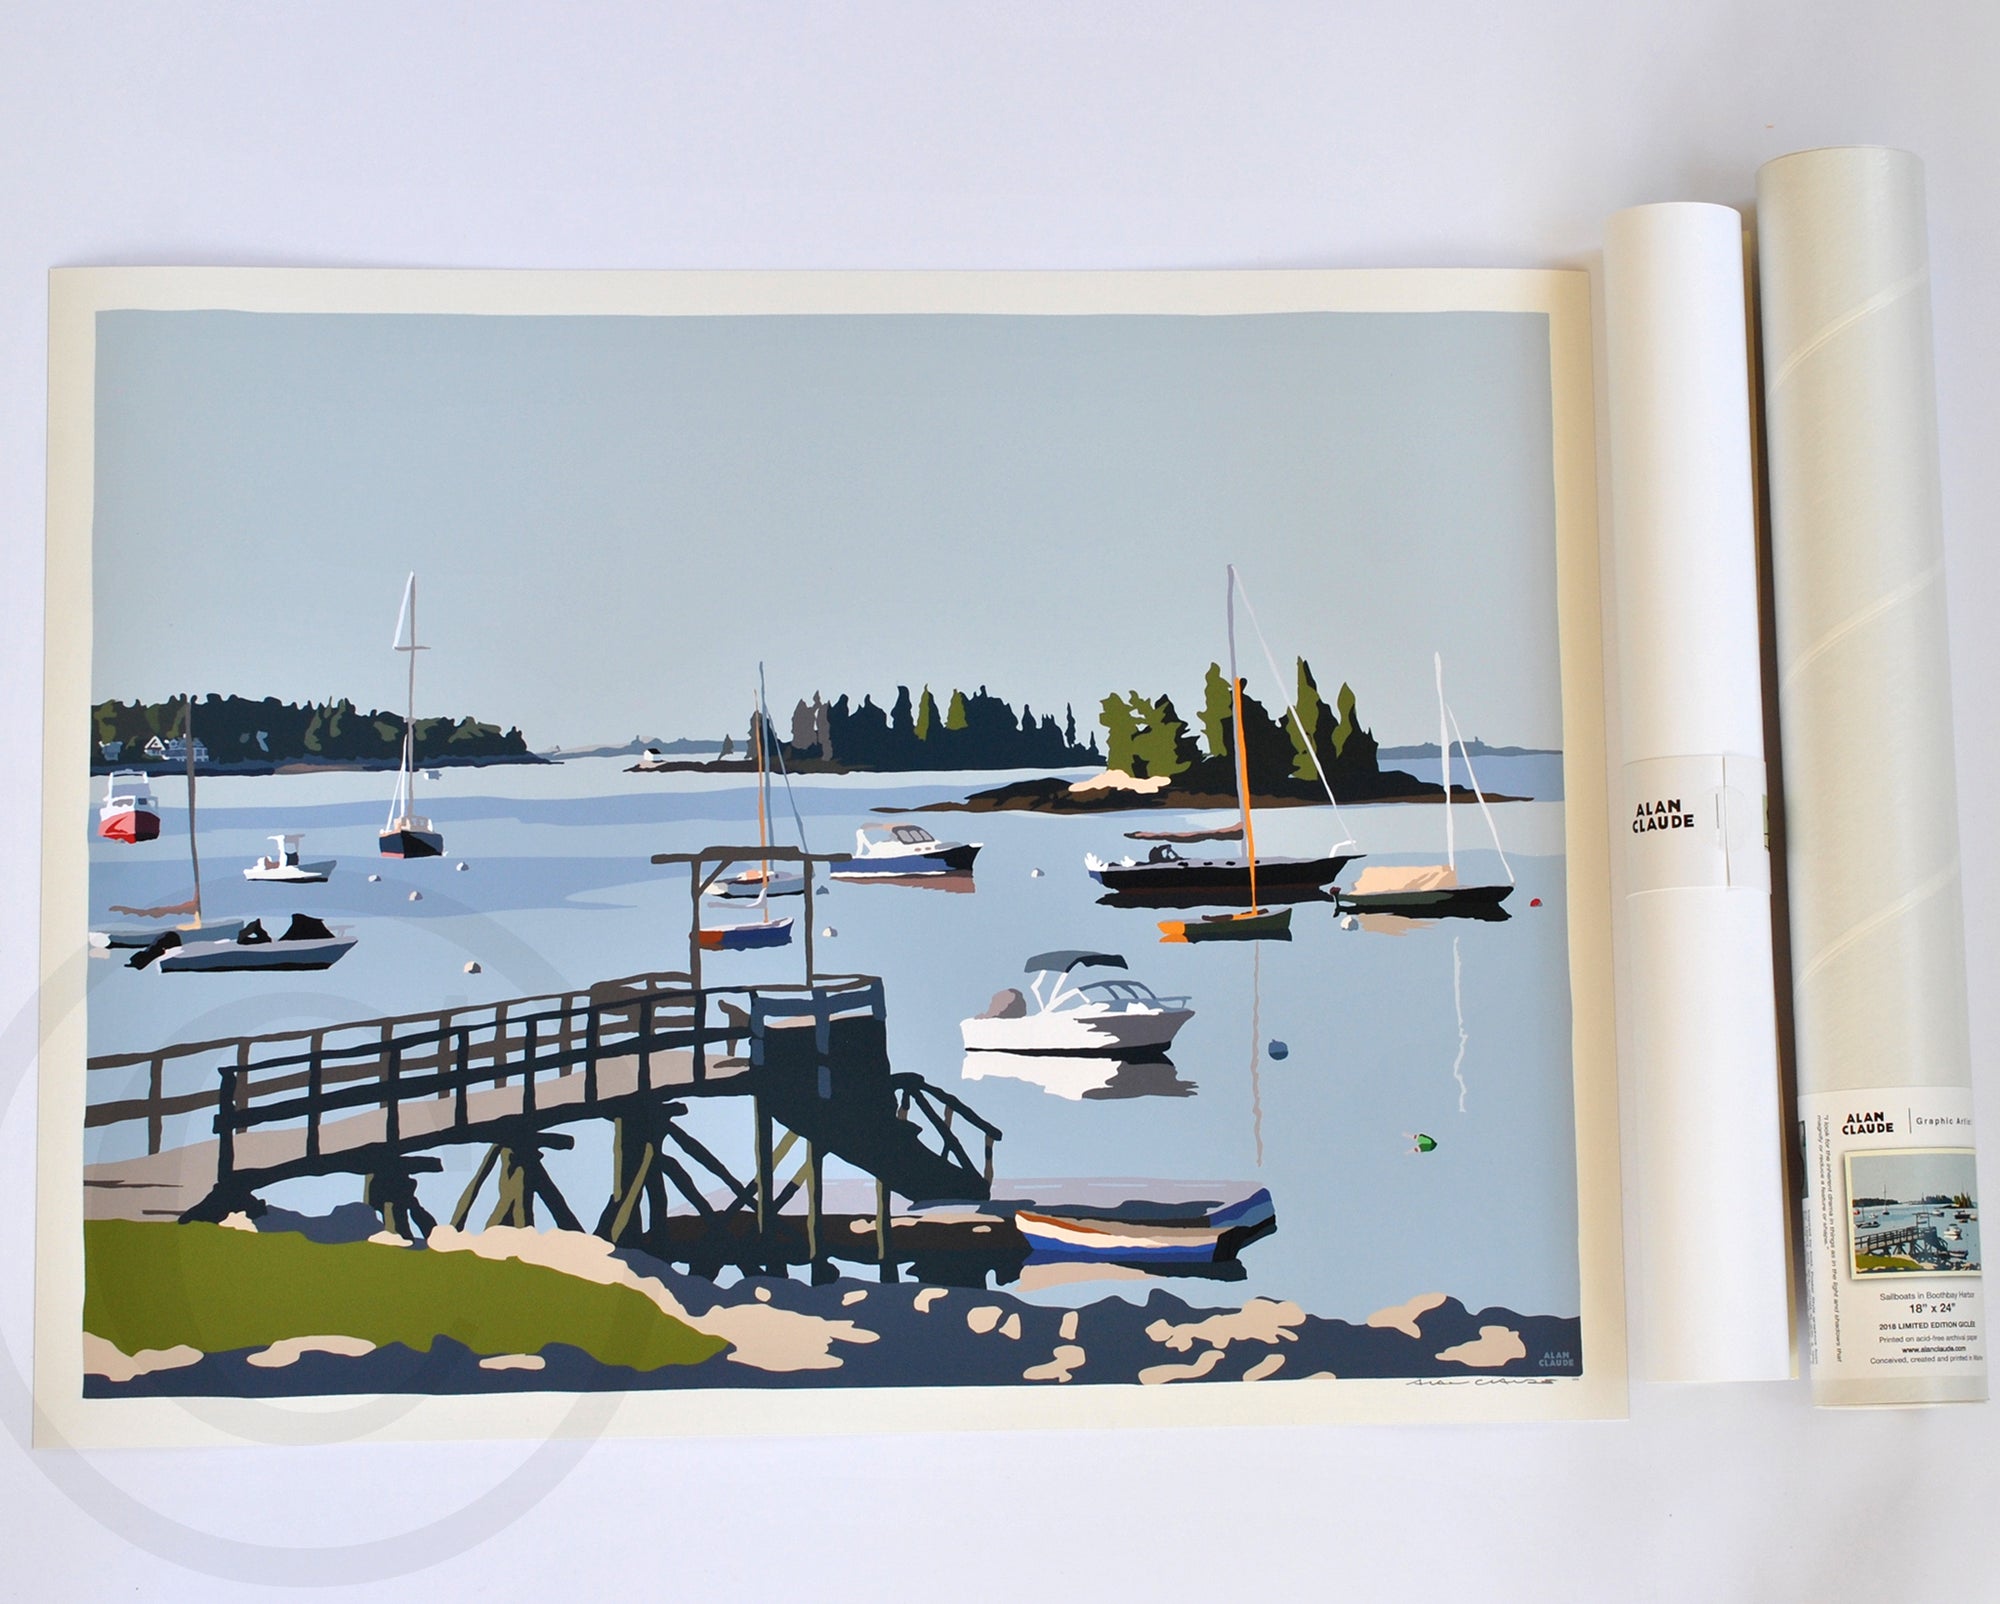 Sailboats in Boothbay Harbor Art Print 18" x 24" Wall Poster By Alan Claude - Maine